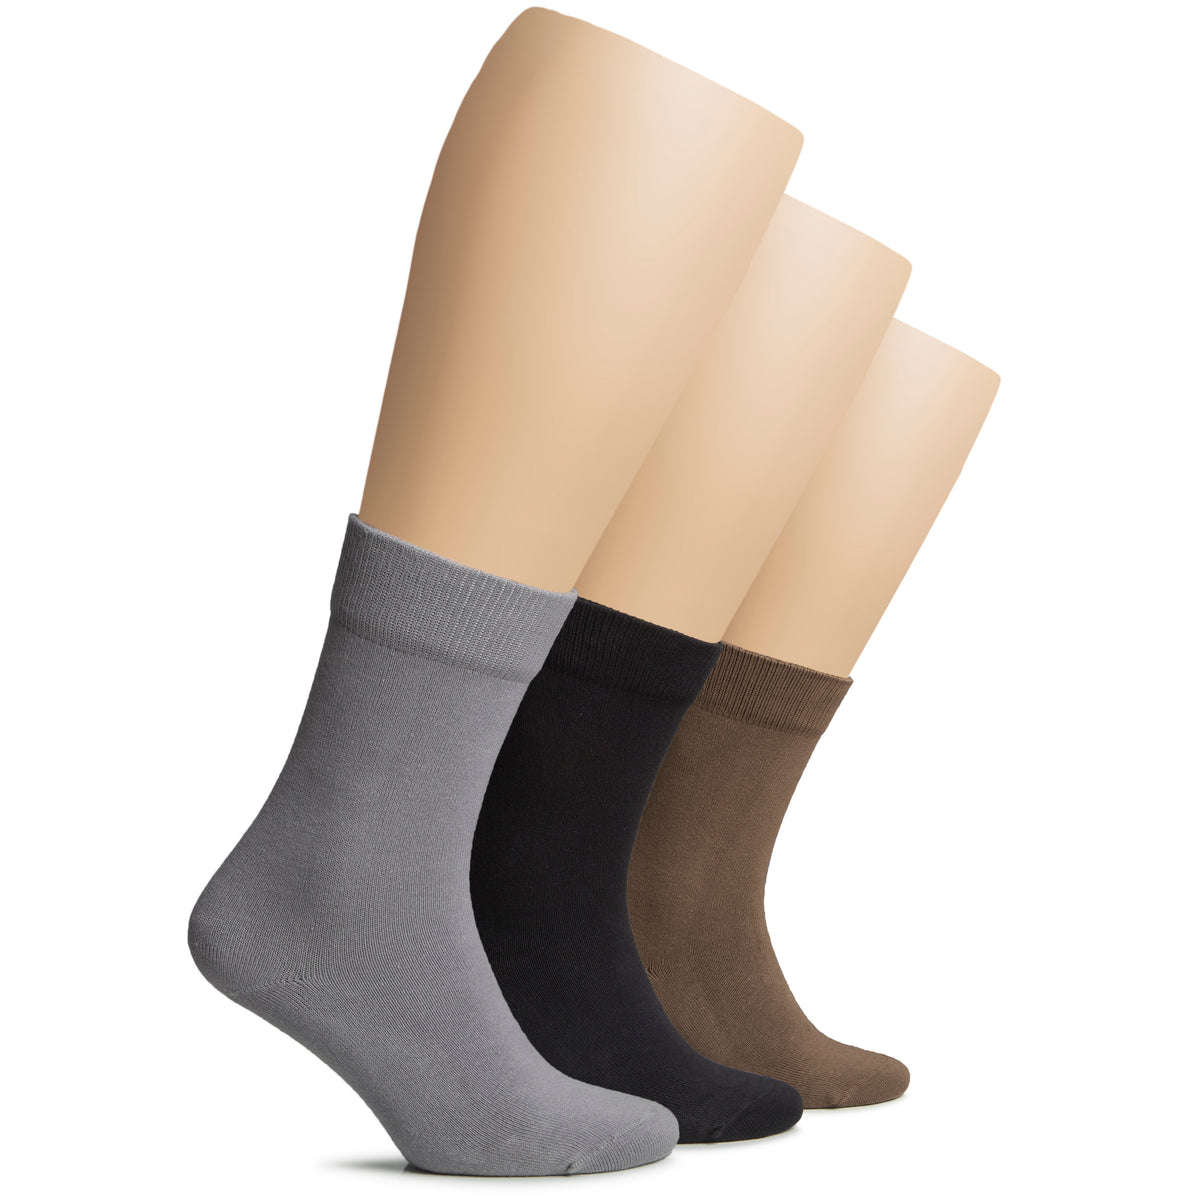 A trio of women's socks in varying hues, perfect for the winter season. These cotton crew socks are designed for women's feet.